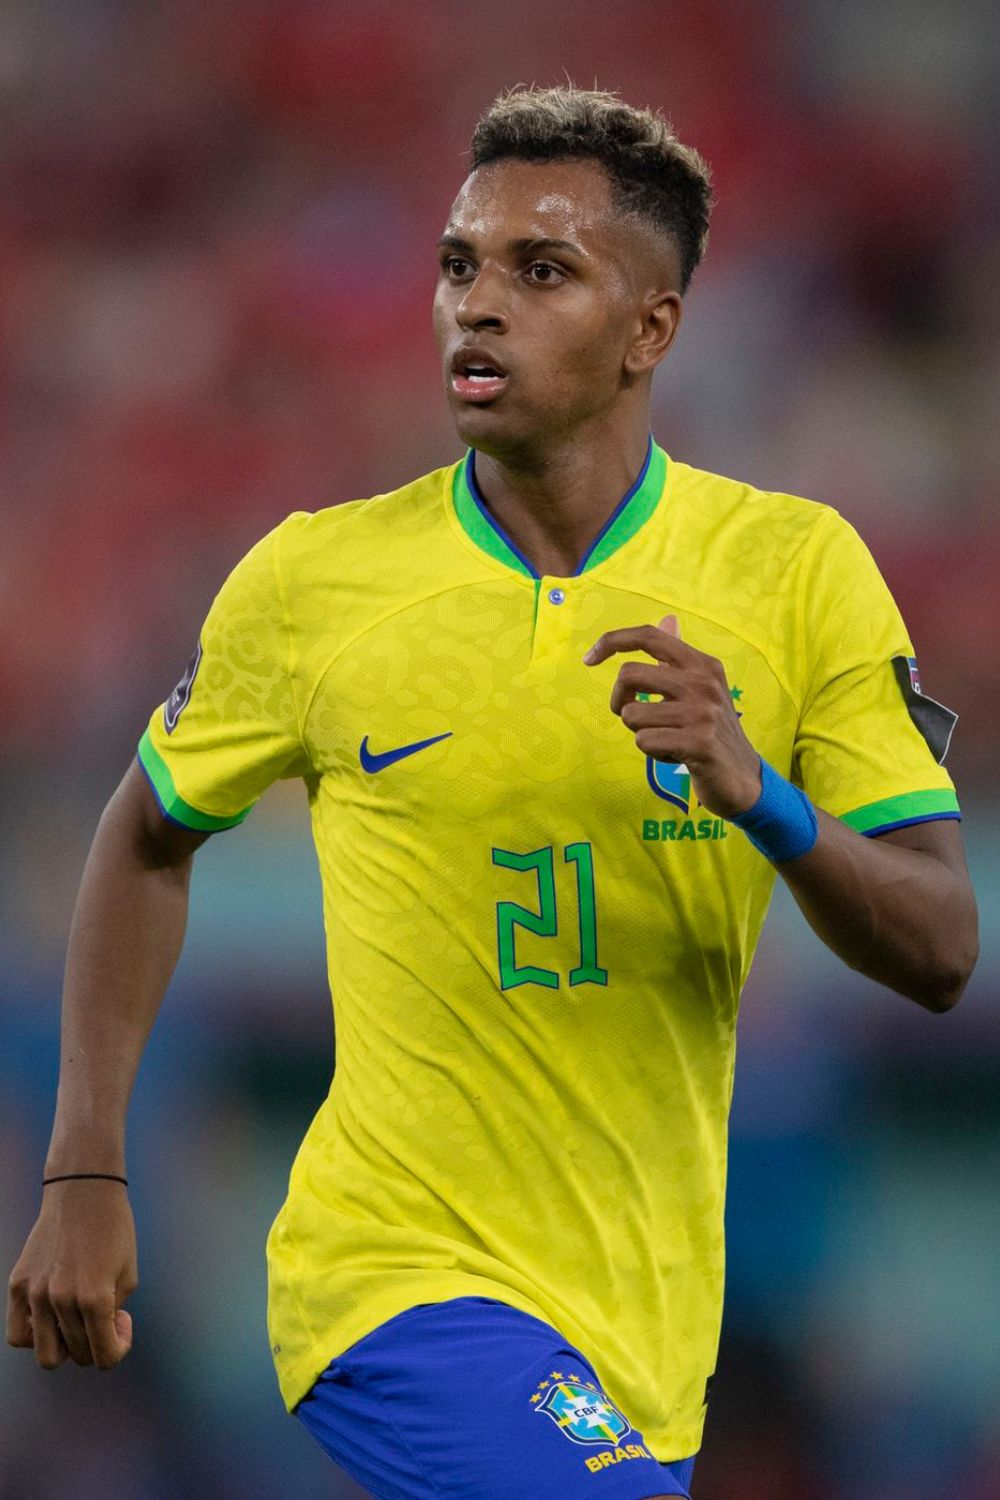 Rodrygo Playing For The Brazil